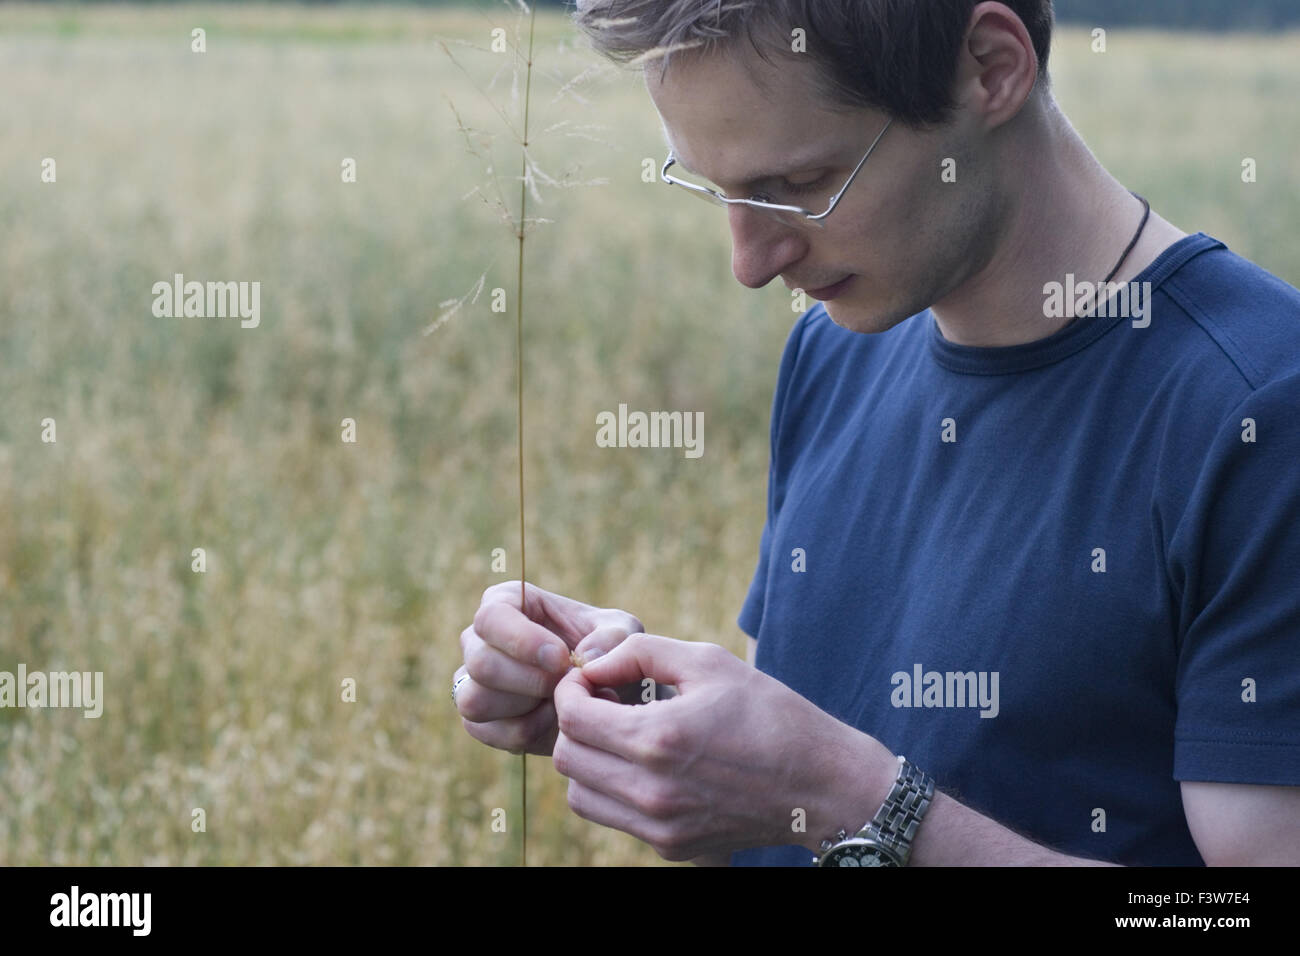 man stands on oat field Stock Photo